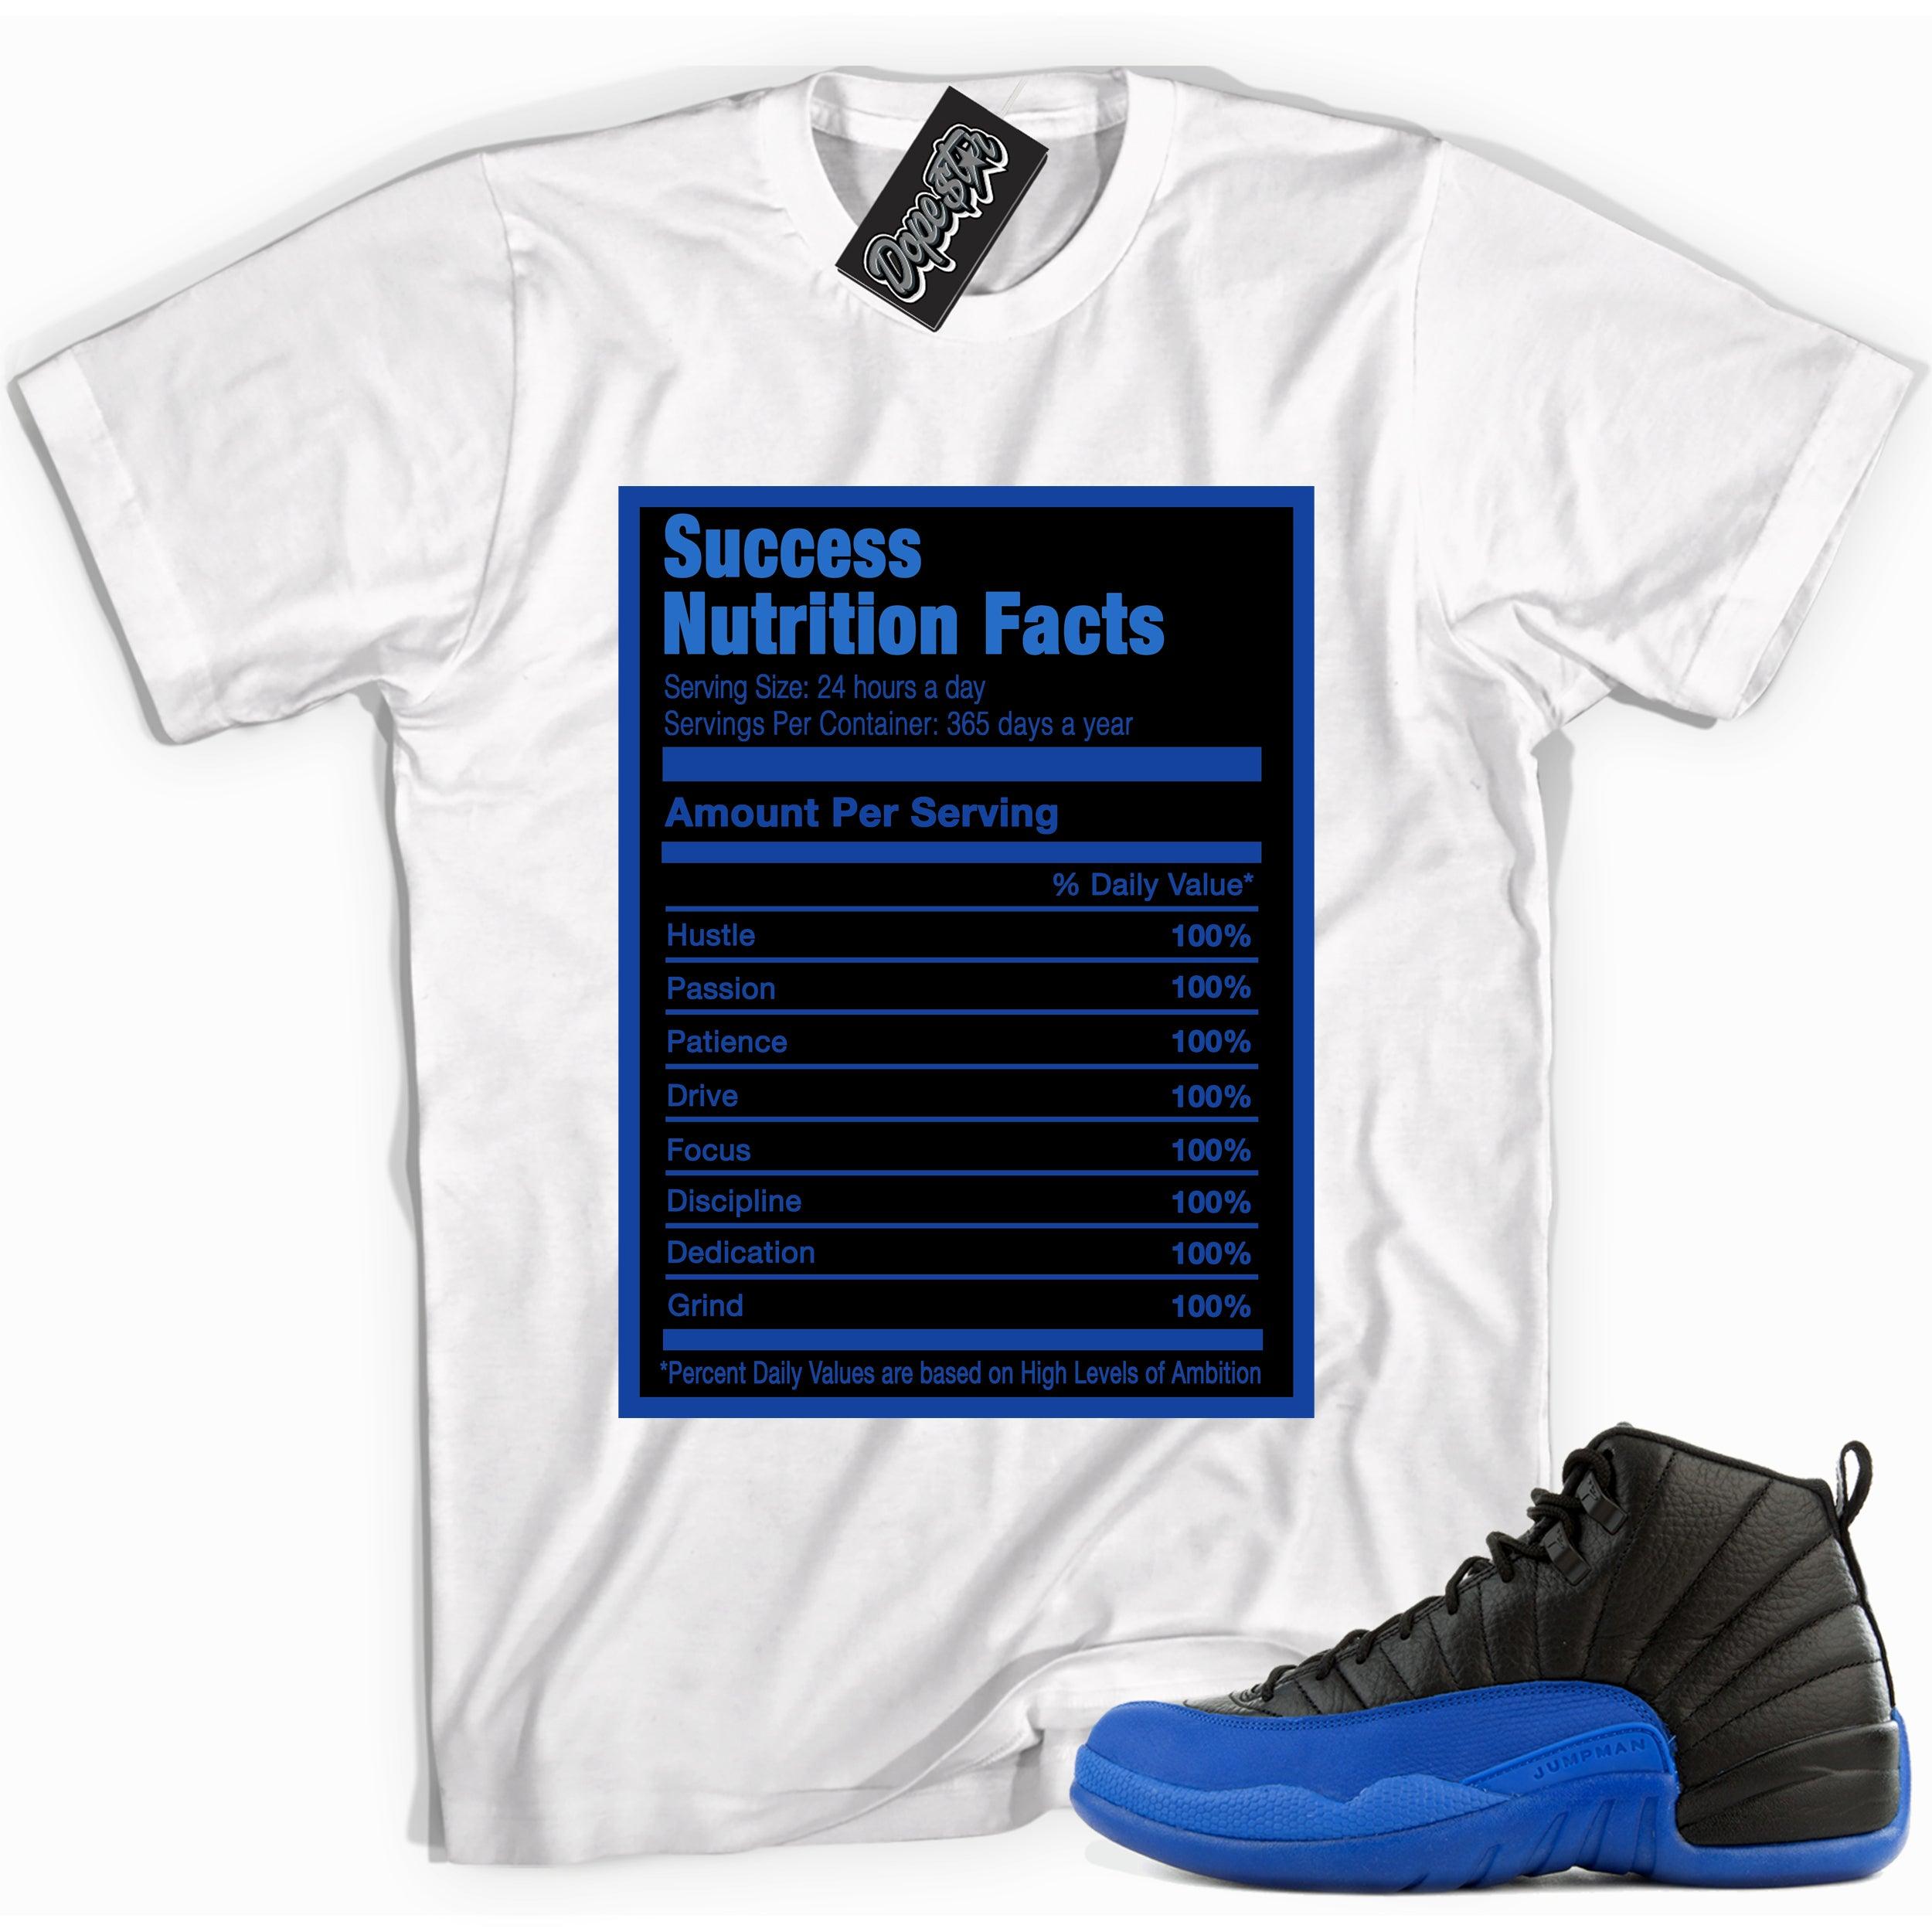 Cool white graphic tee with 'success nutrition facts' print, that perfectly matches Air Jordan 12 Retro Black Game Royal sneakers.